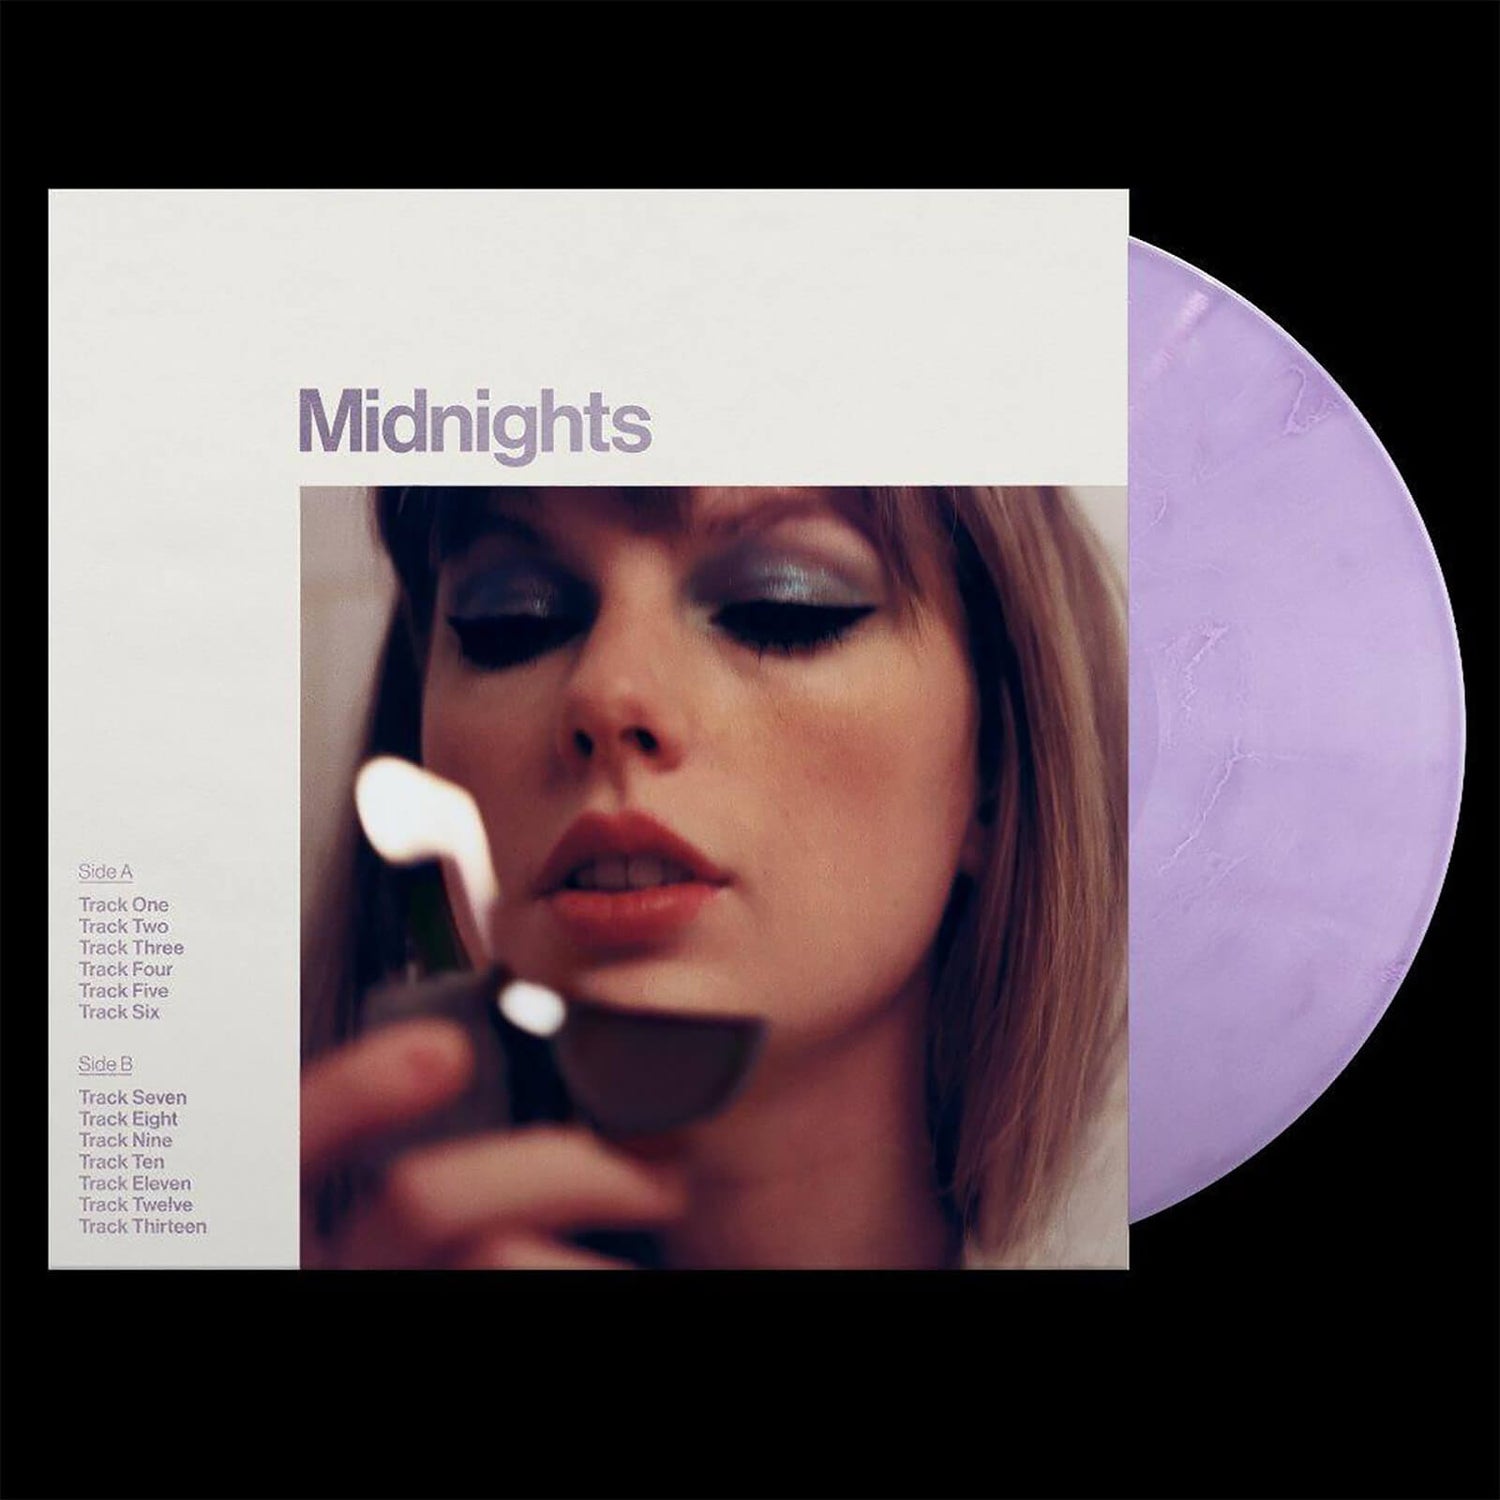 Holly on Instagram: Midnights by Taylor Swift, but make it Lego